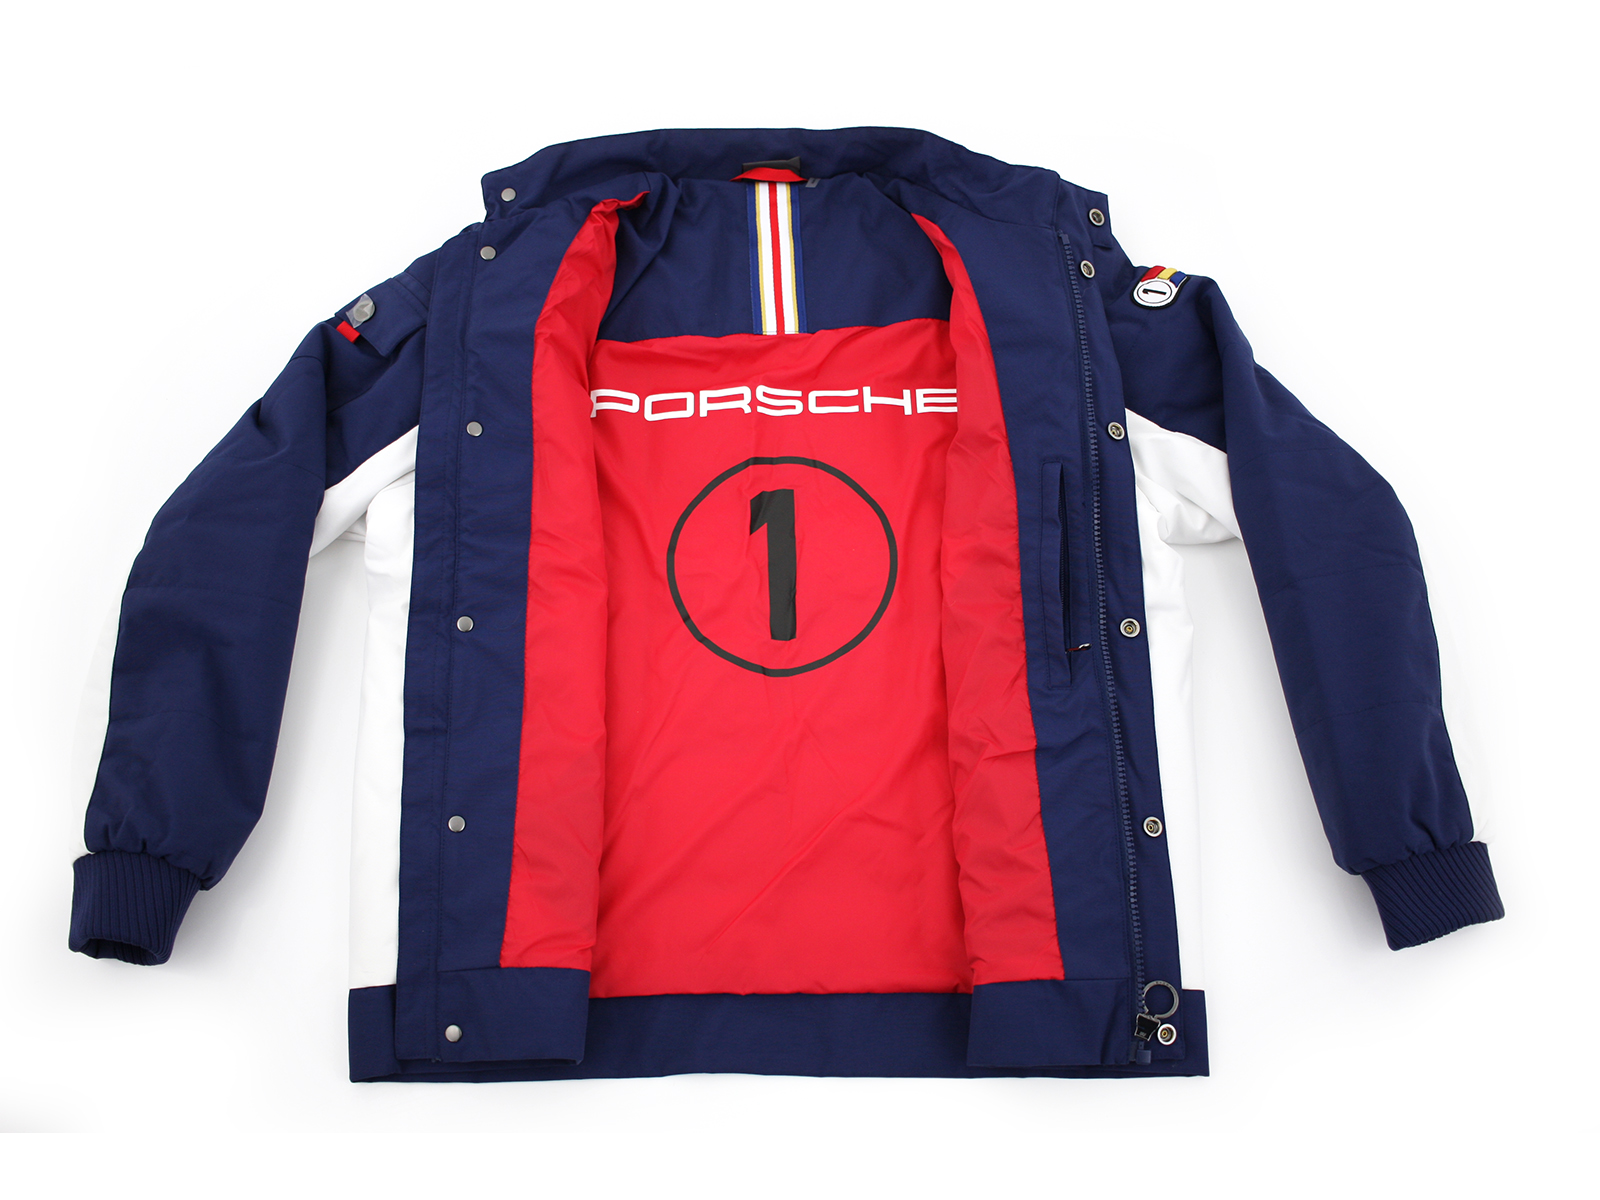 Buy Porsche Jackets and Pullovers | Design 911